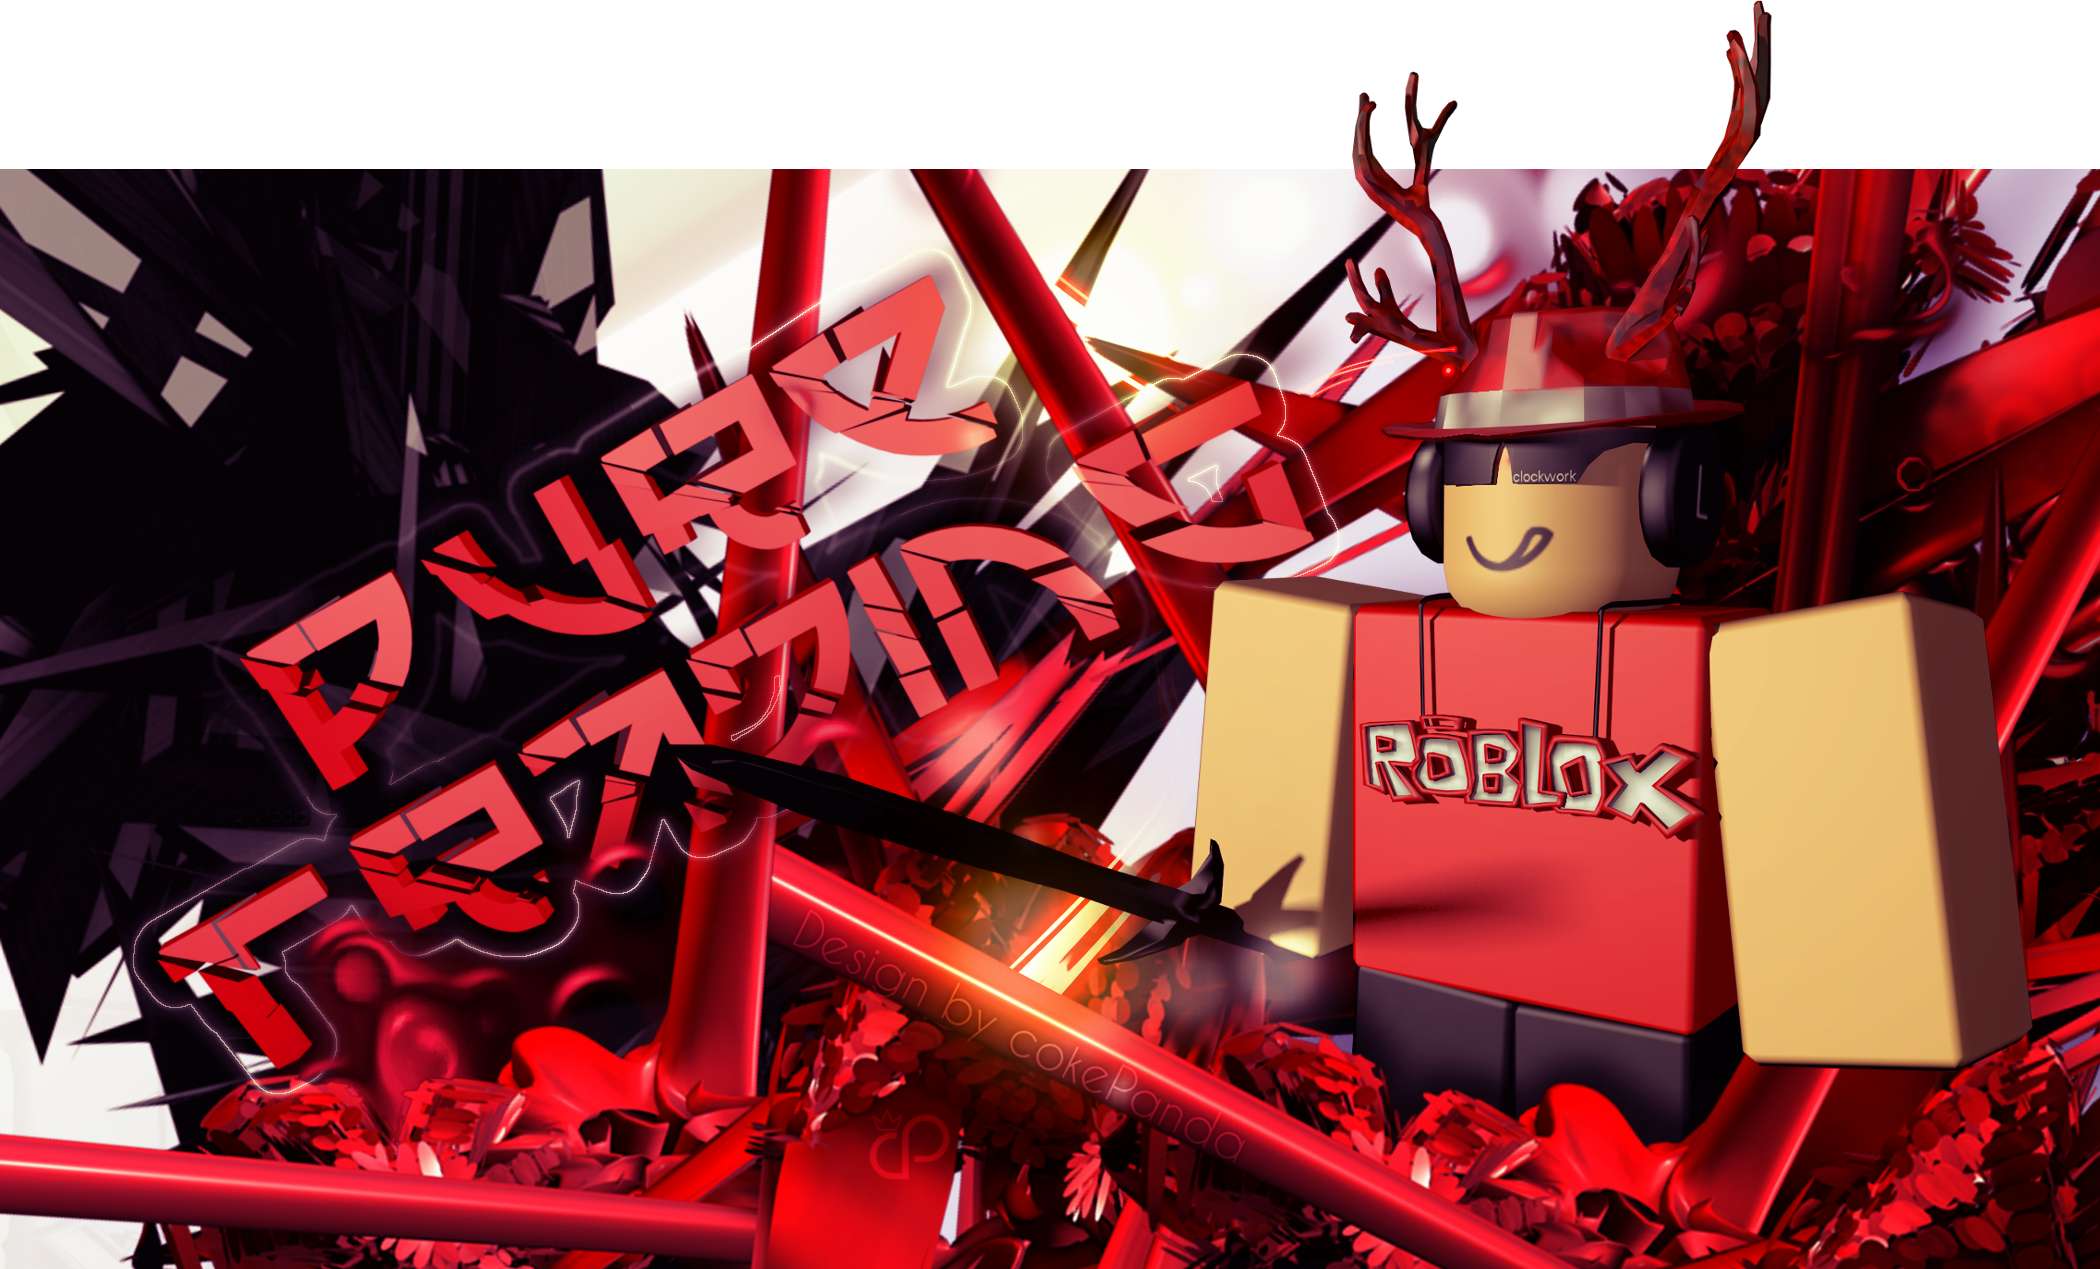 Roblox Puretrading Thumbnail Design By Thisiscamel On - roblox cokepanda thumbnail design 8 by thisiscamel on